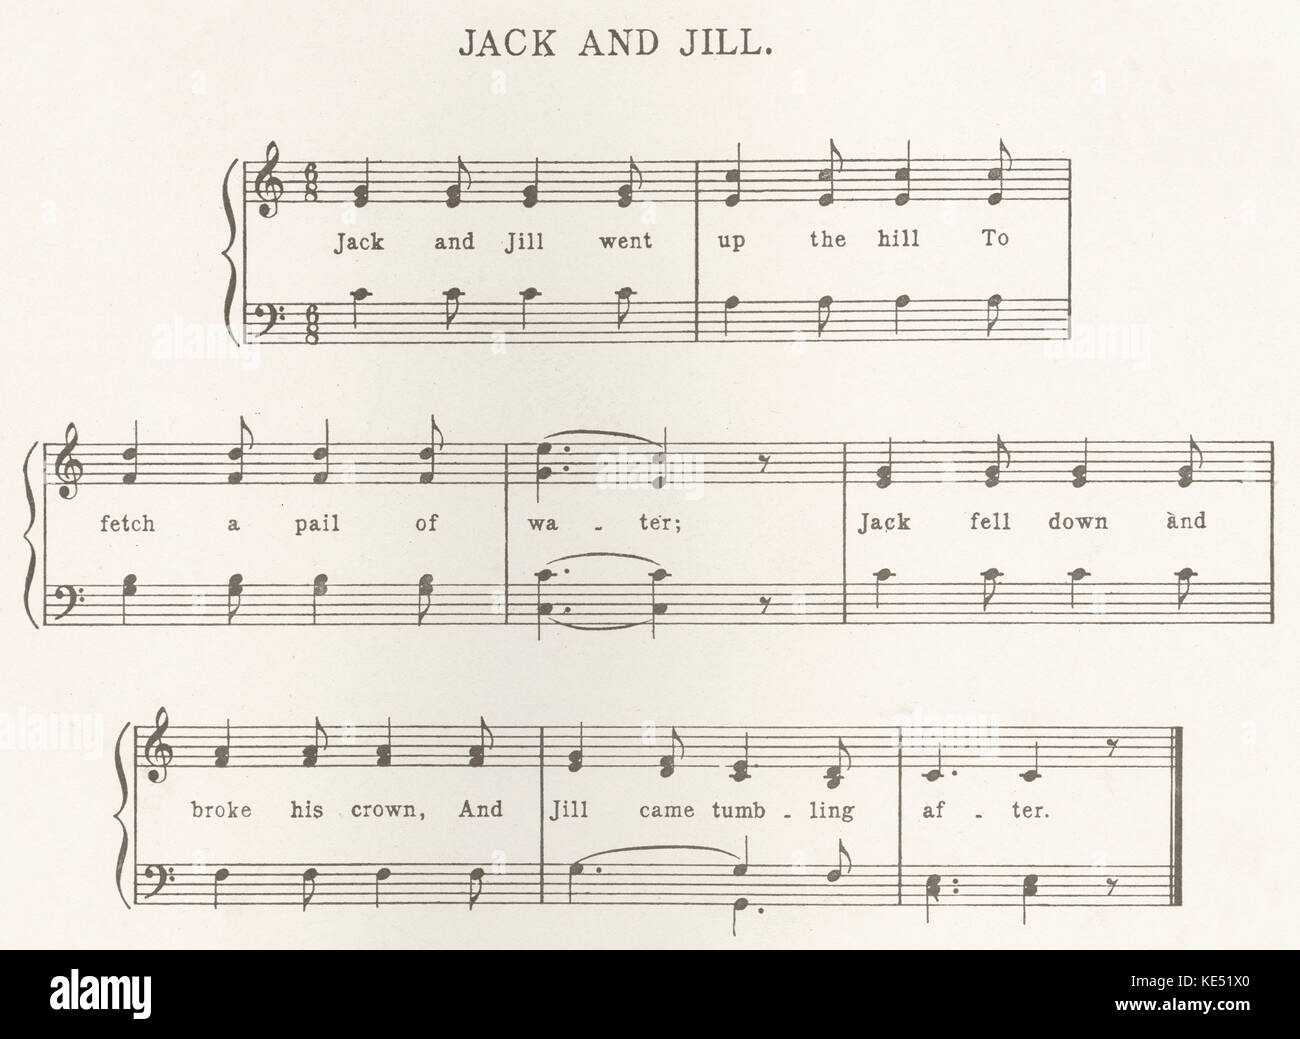 'Jack And Jill' - score and lyrics of the popular children 's song and nursery rhyme. Stock Photo